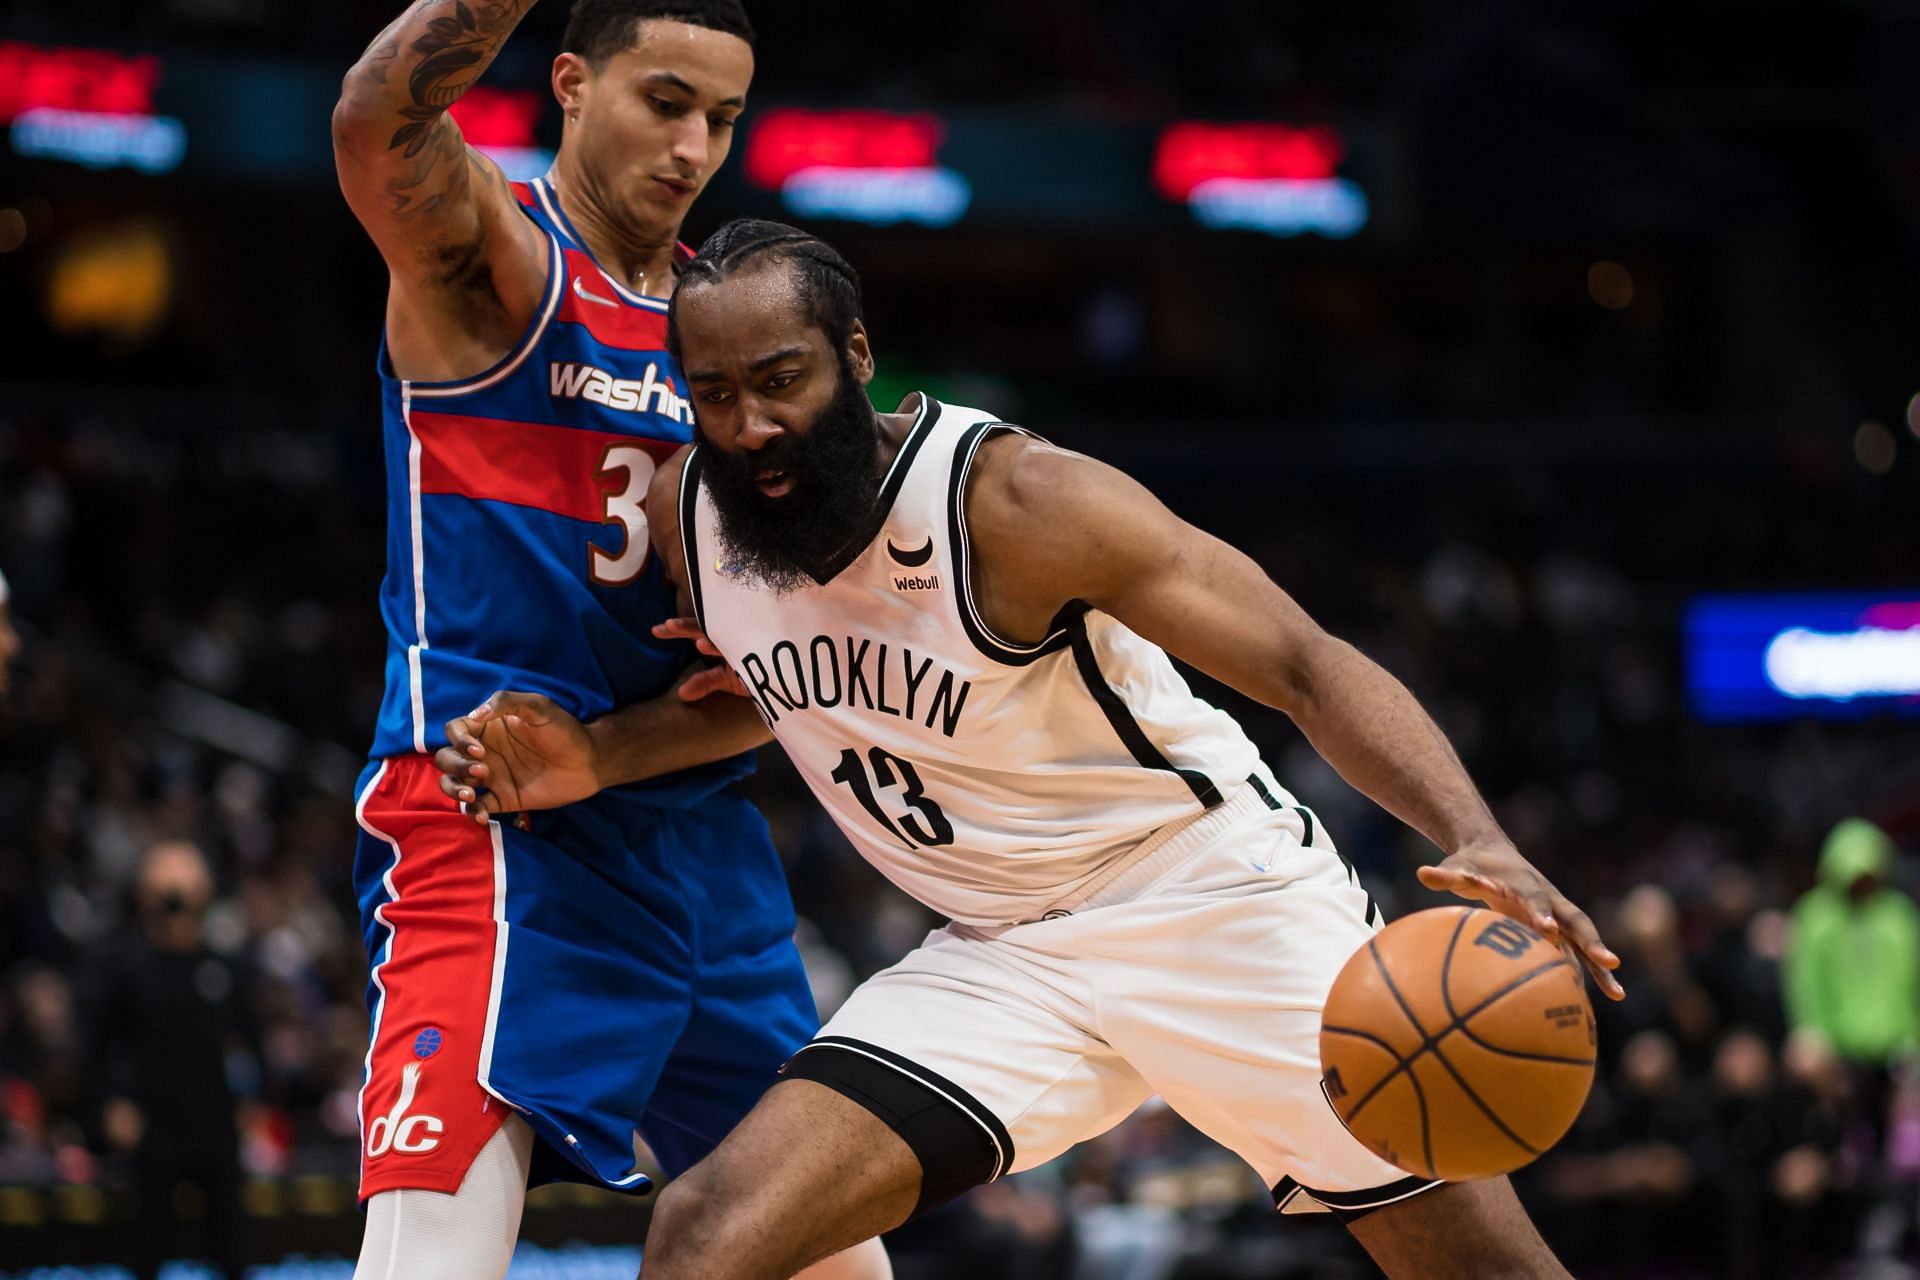 Brooklyn Nets guard James Harden with the ball